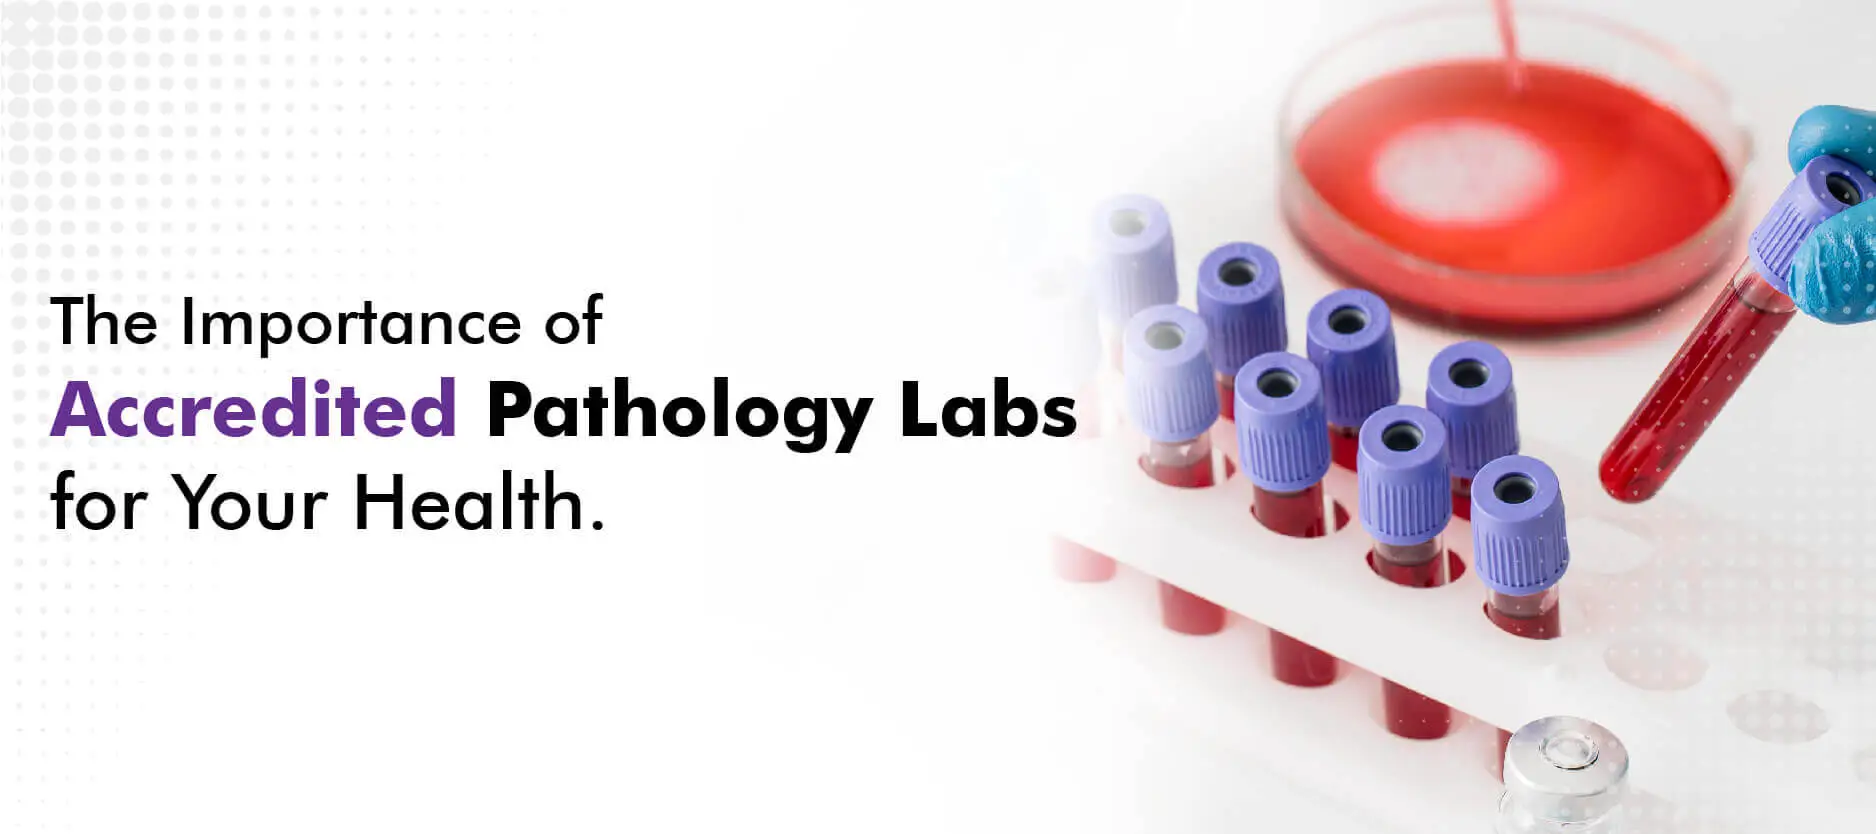 The Importance of Accredited Pathology Labs for Your Health